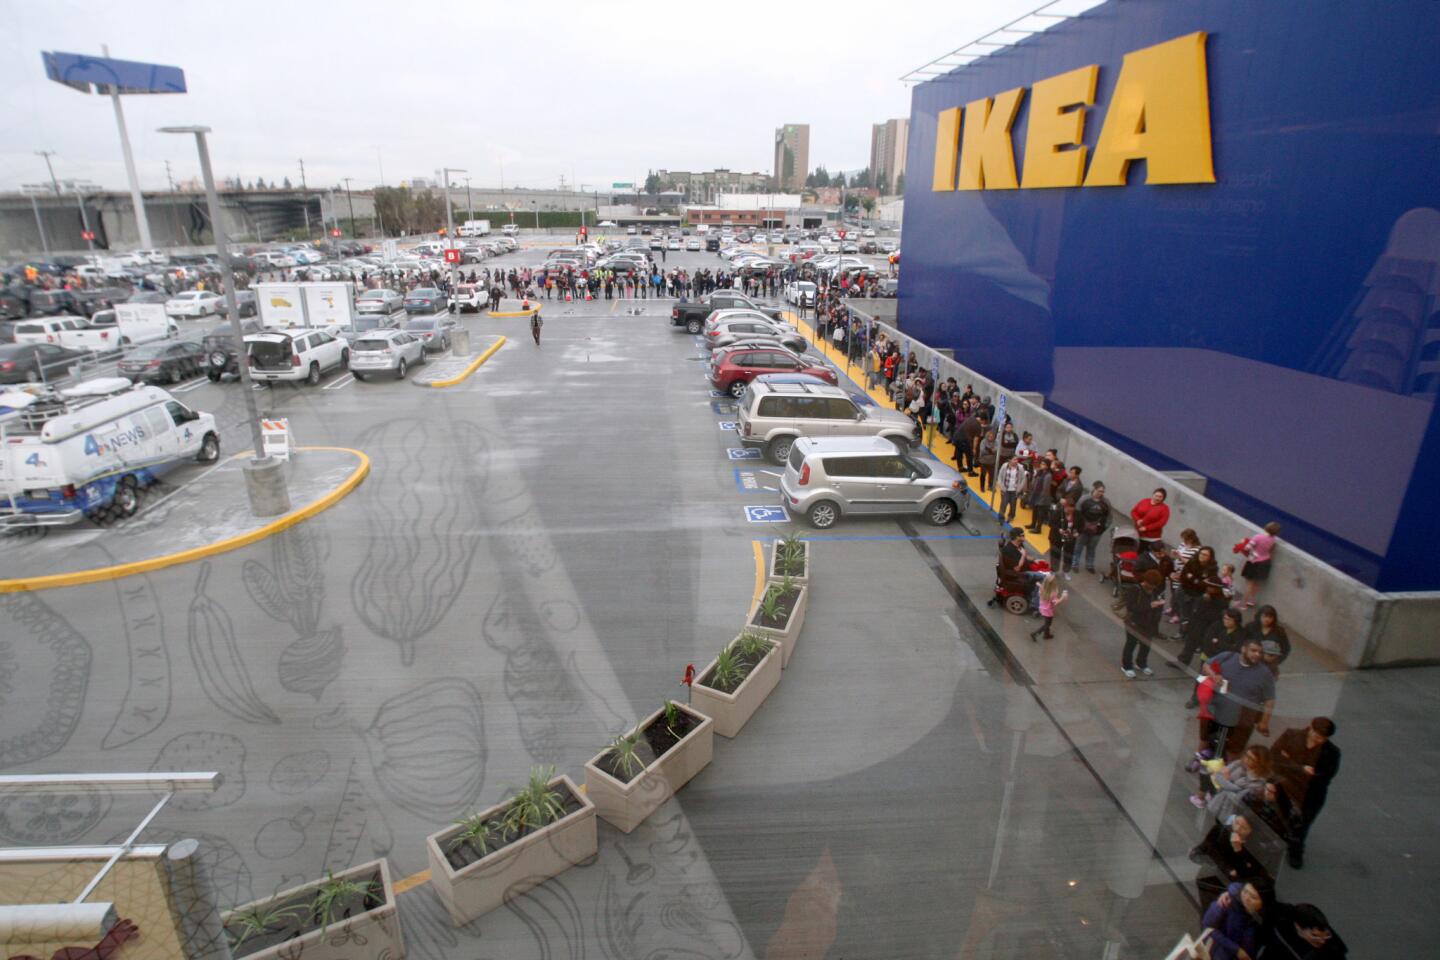 Photo Gallery: Largest Ikea store in North America opens in Burbank